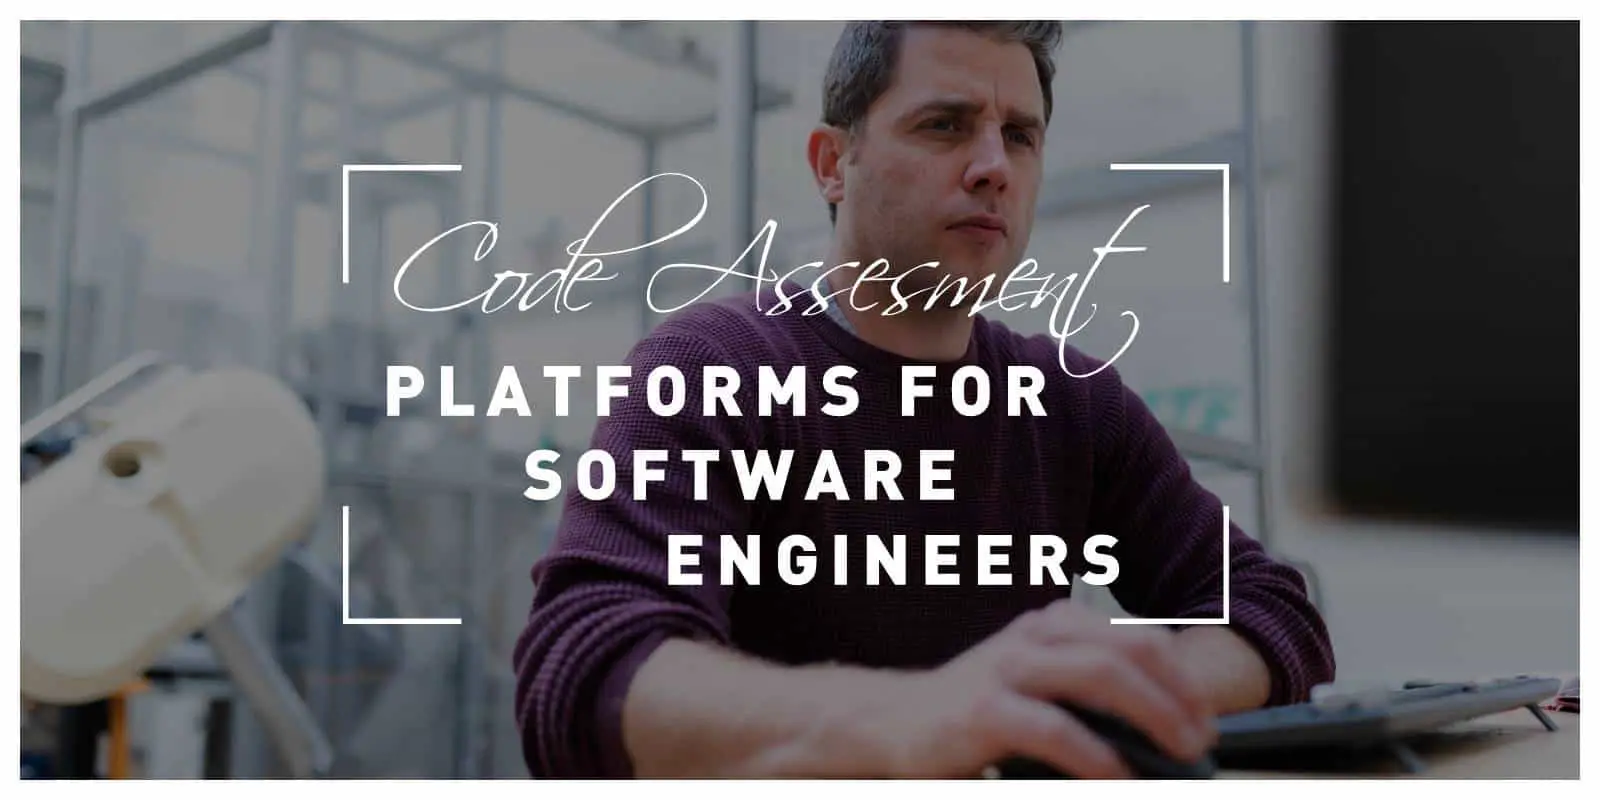 Top Code Assessment Platforms for Software Engineers